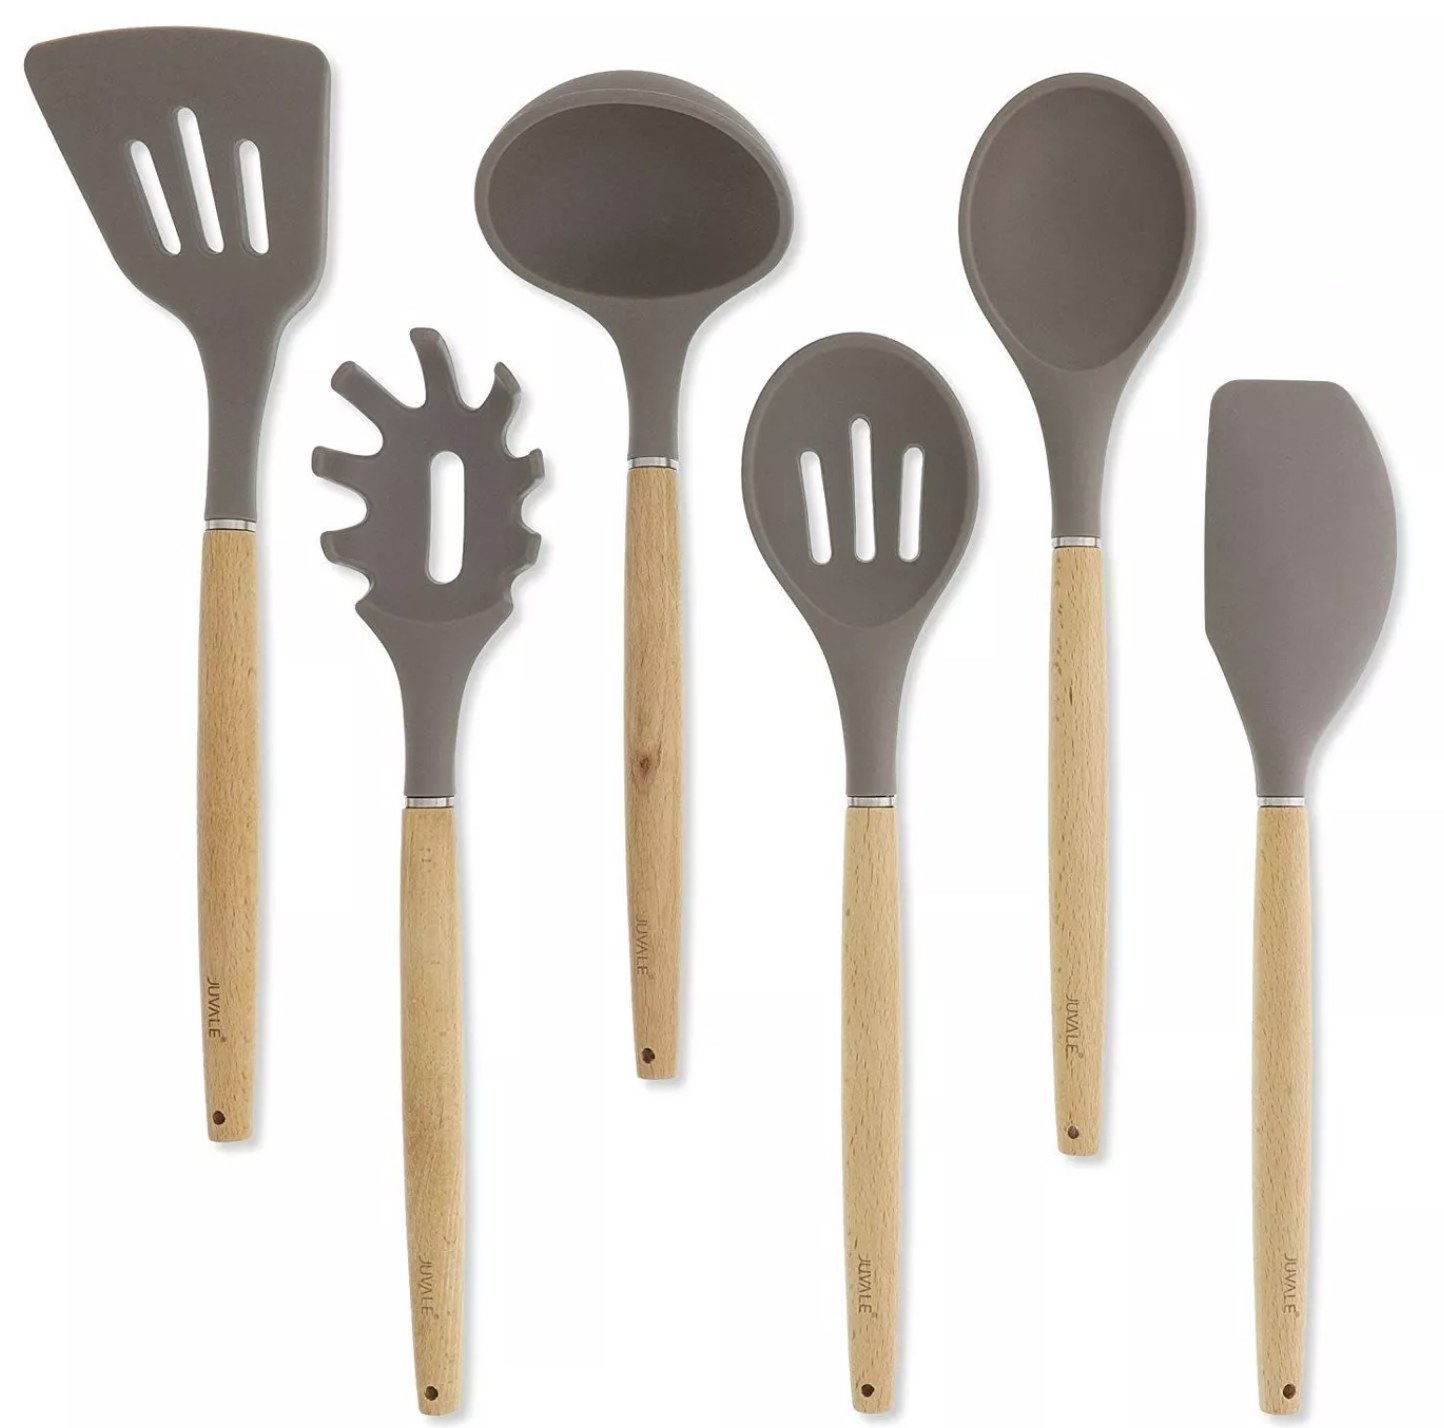 A 7-piece set of bamboo non-stick silicone utensils